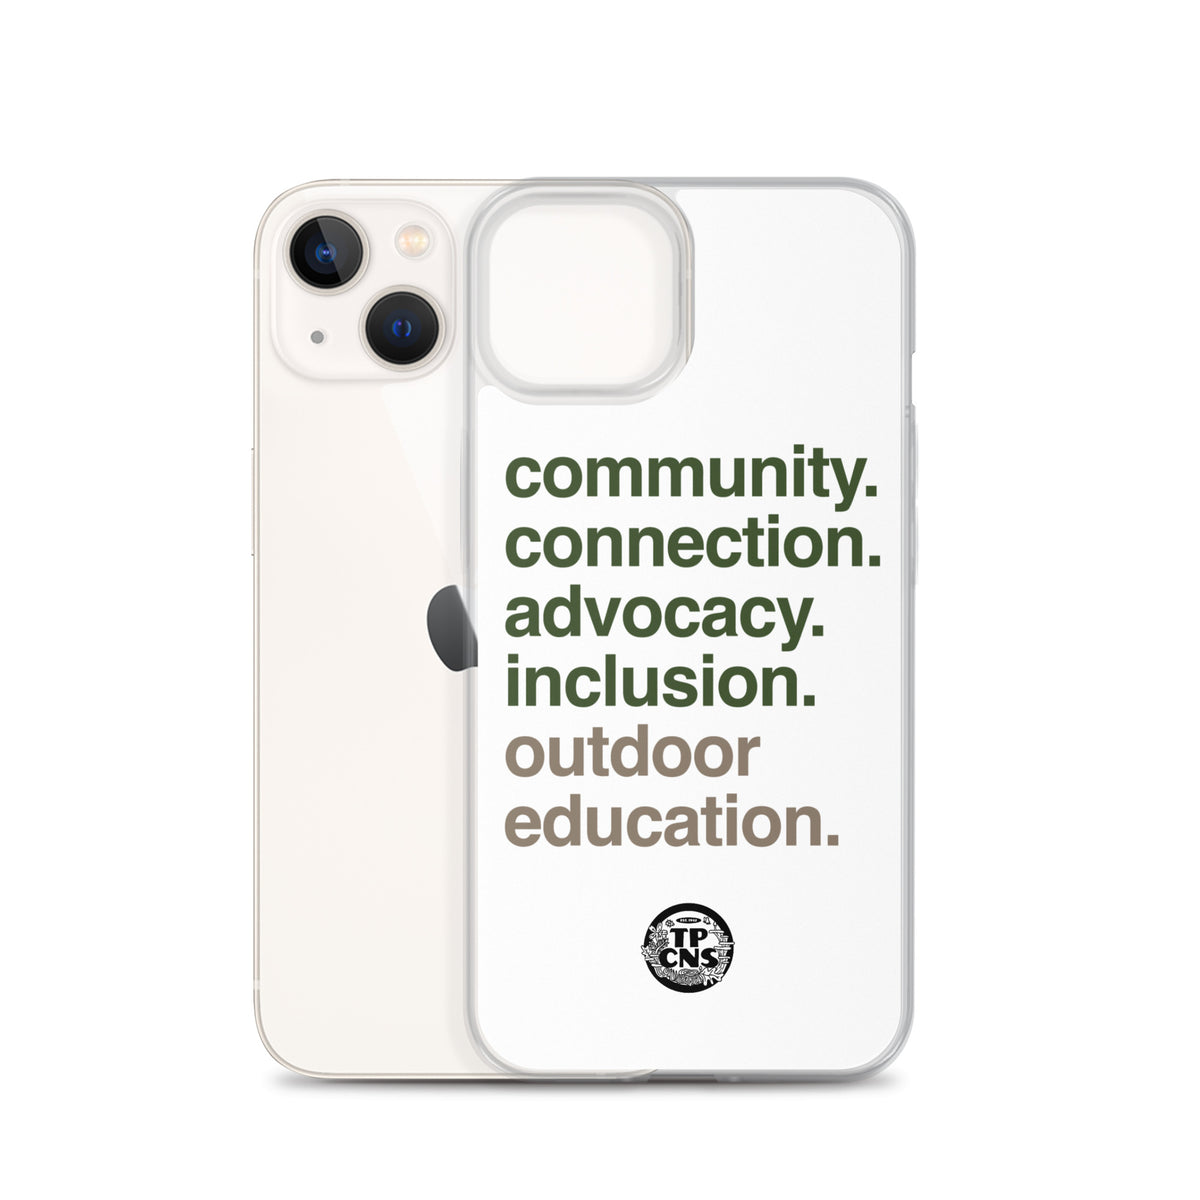 TPCNS Outdoor Education iPhone Case